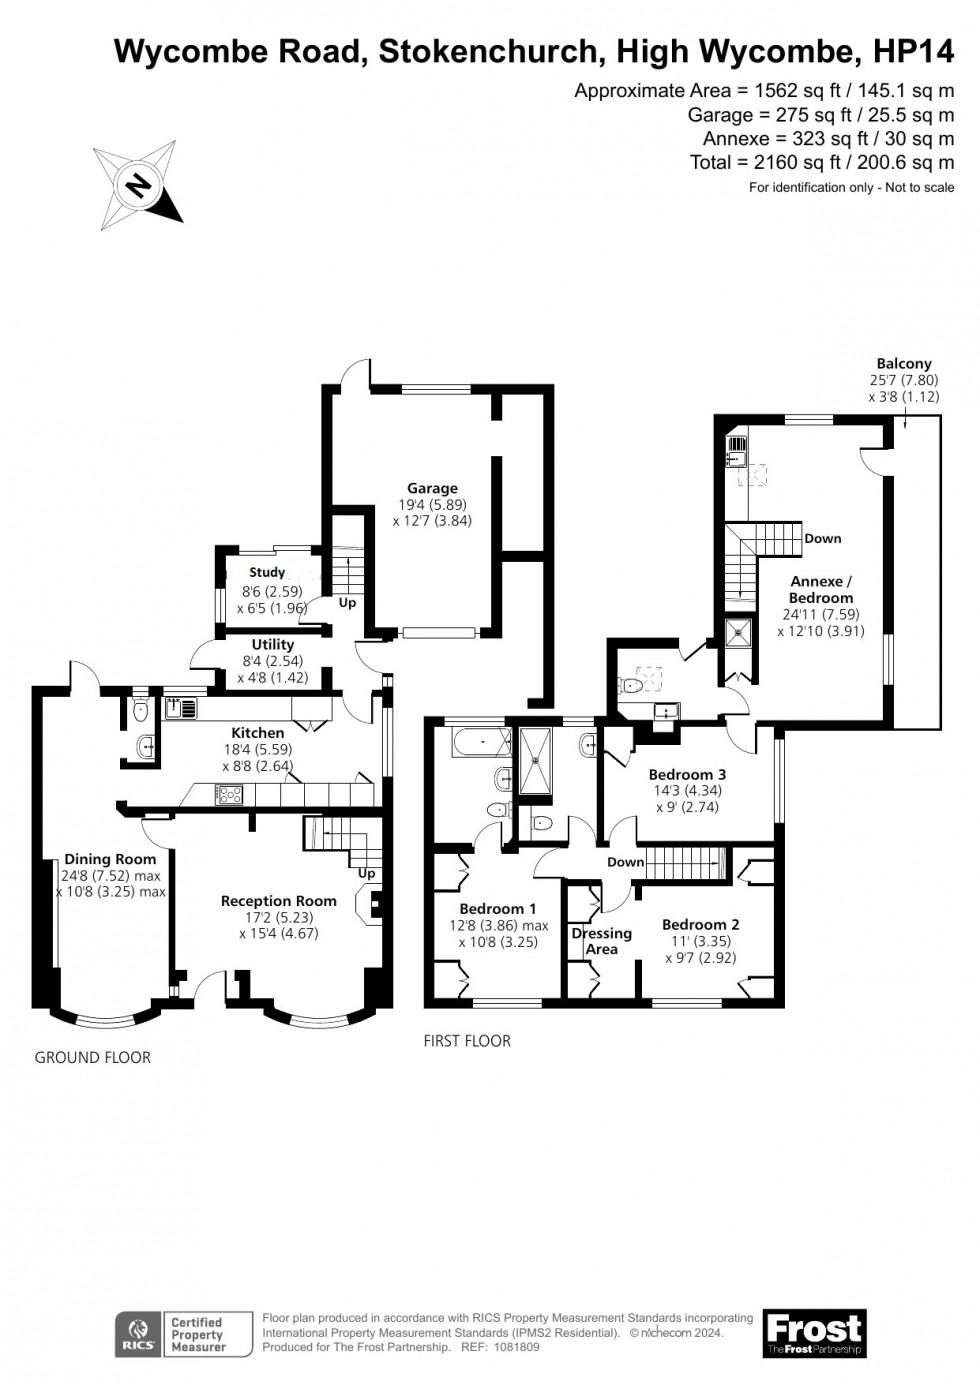 Floorplan for Stokenchurch, High Wycombe, HP14